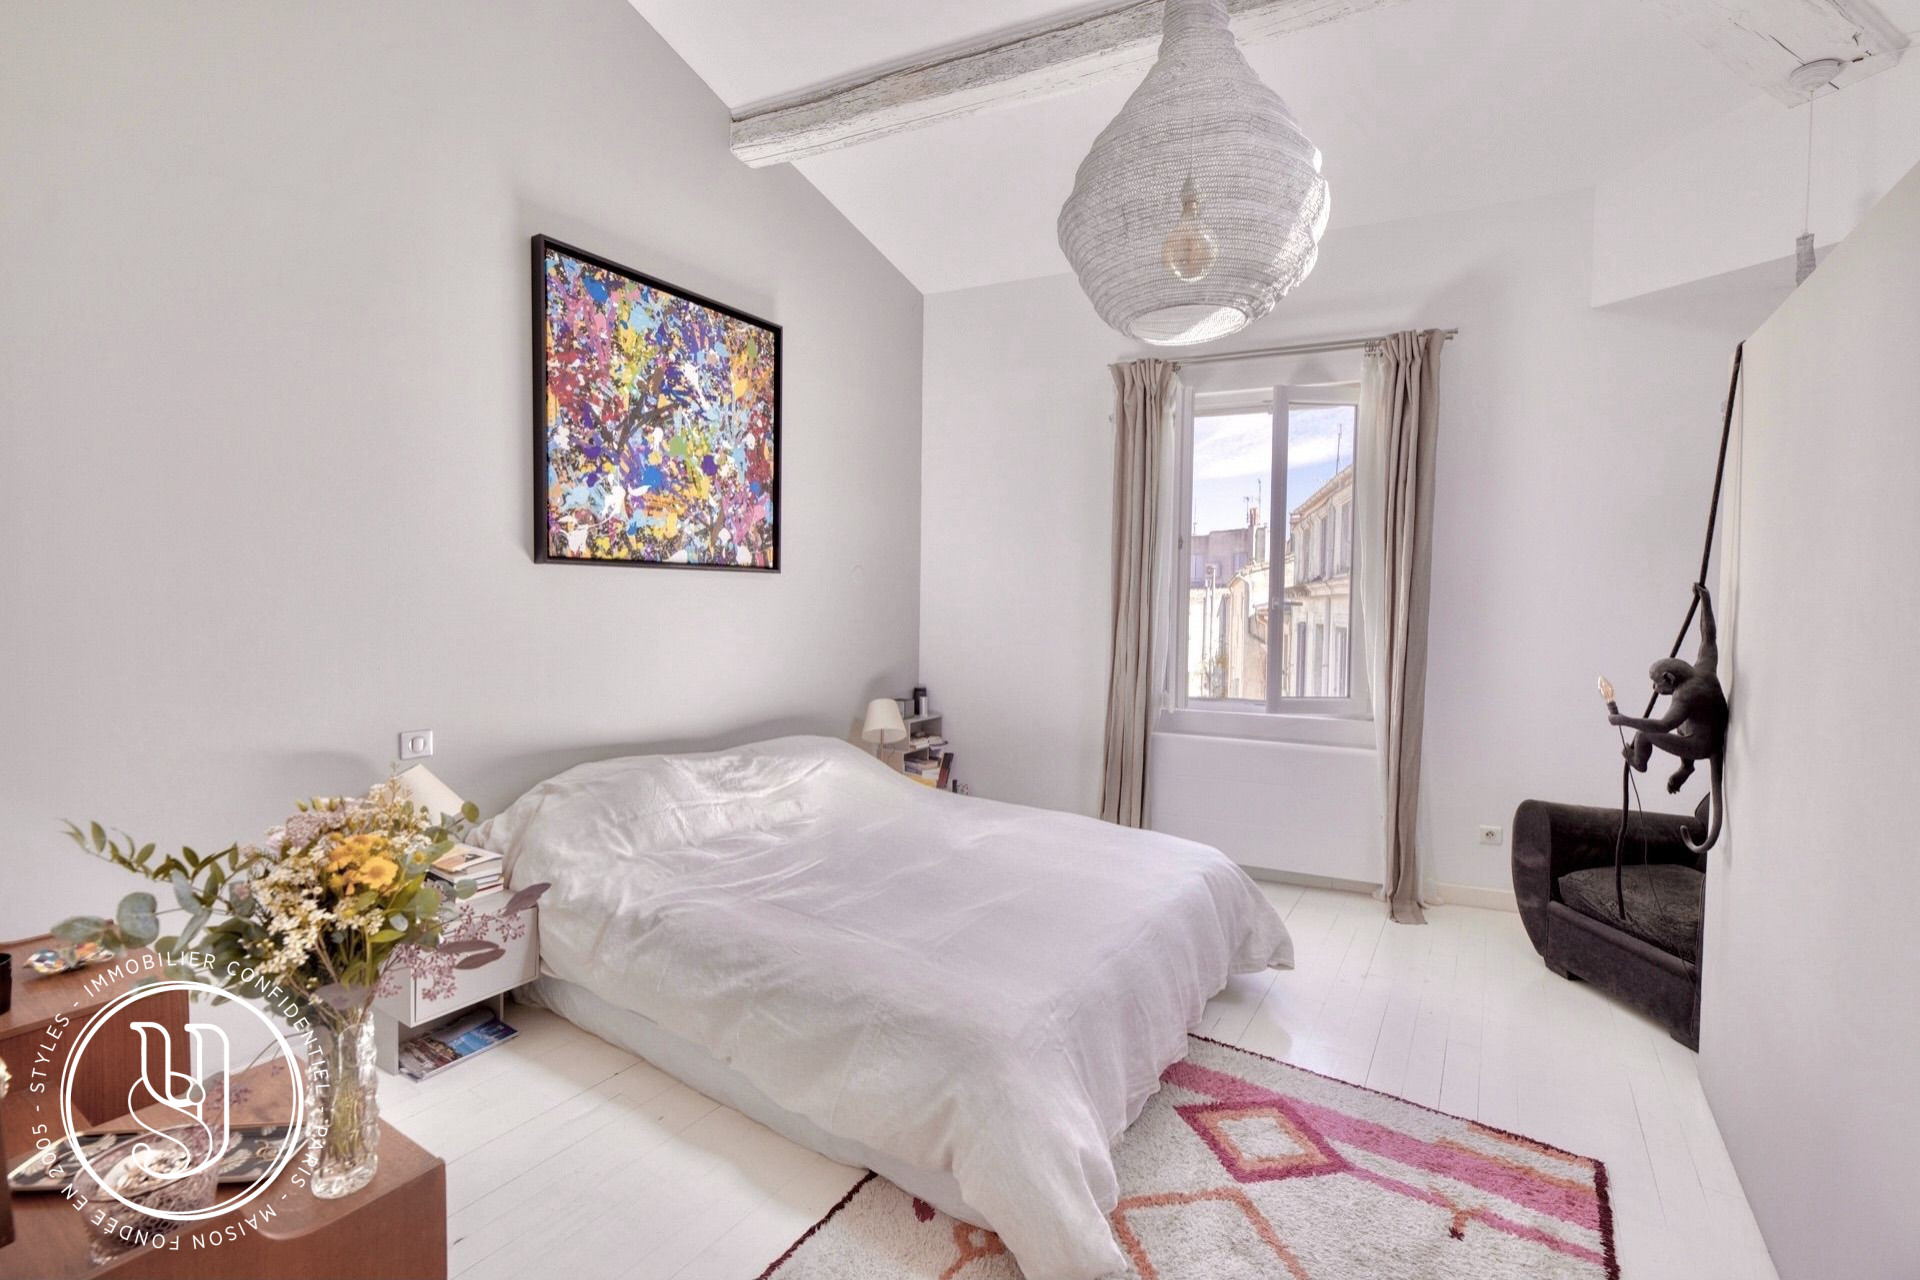 Montpellier - Sold by S T Y L E S, Ecusson, a flat with terraces... - image 10